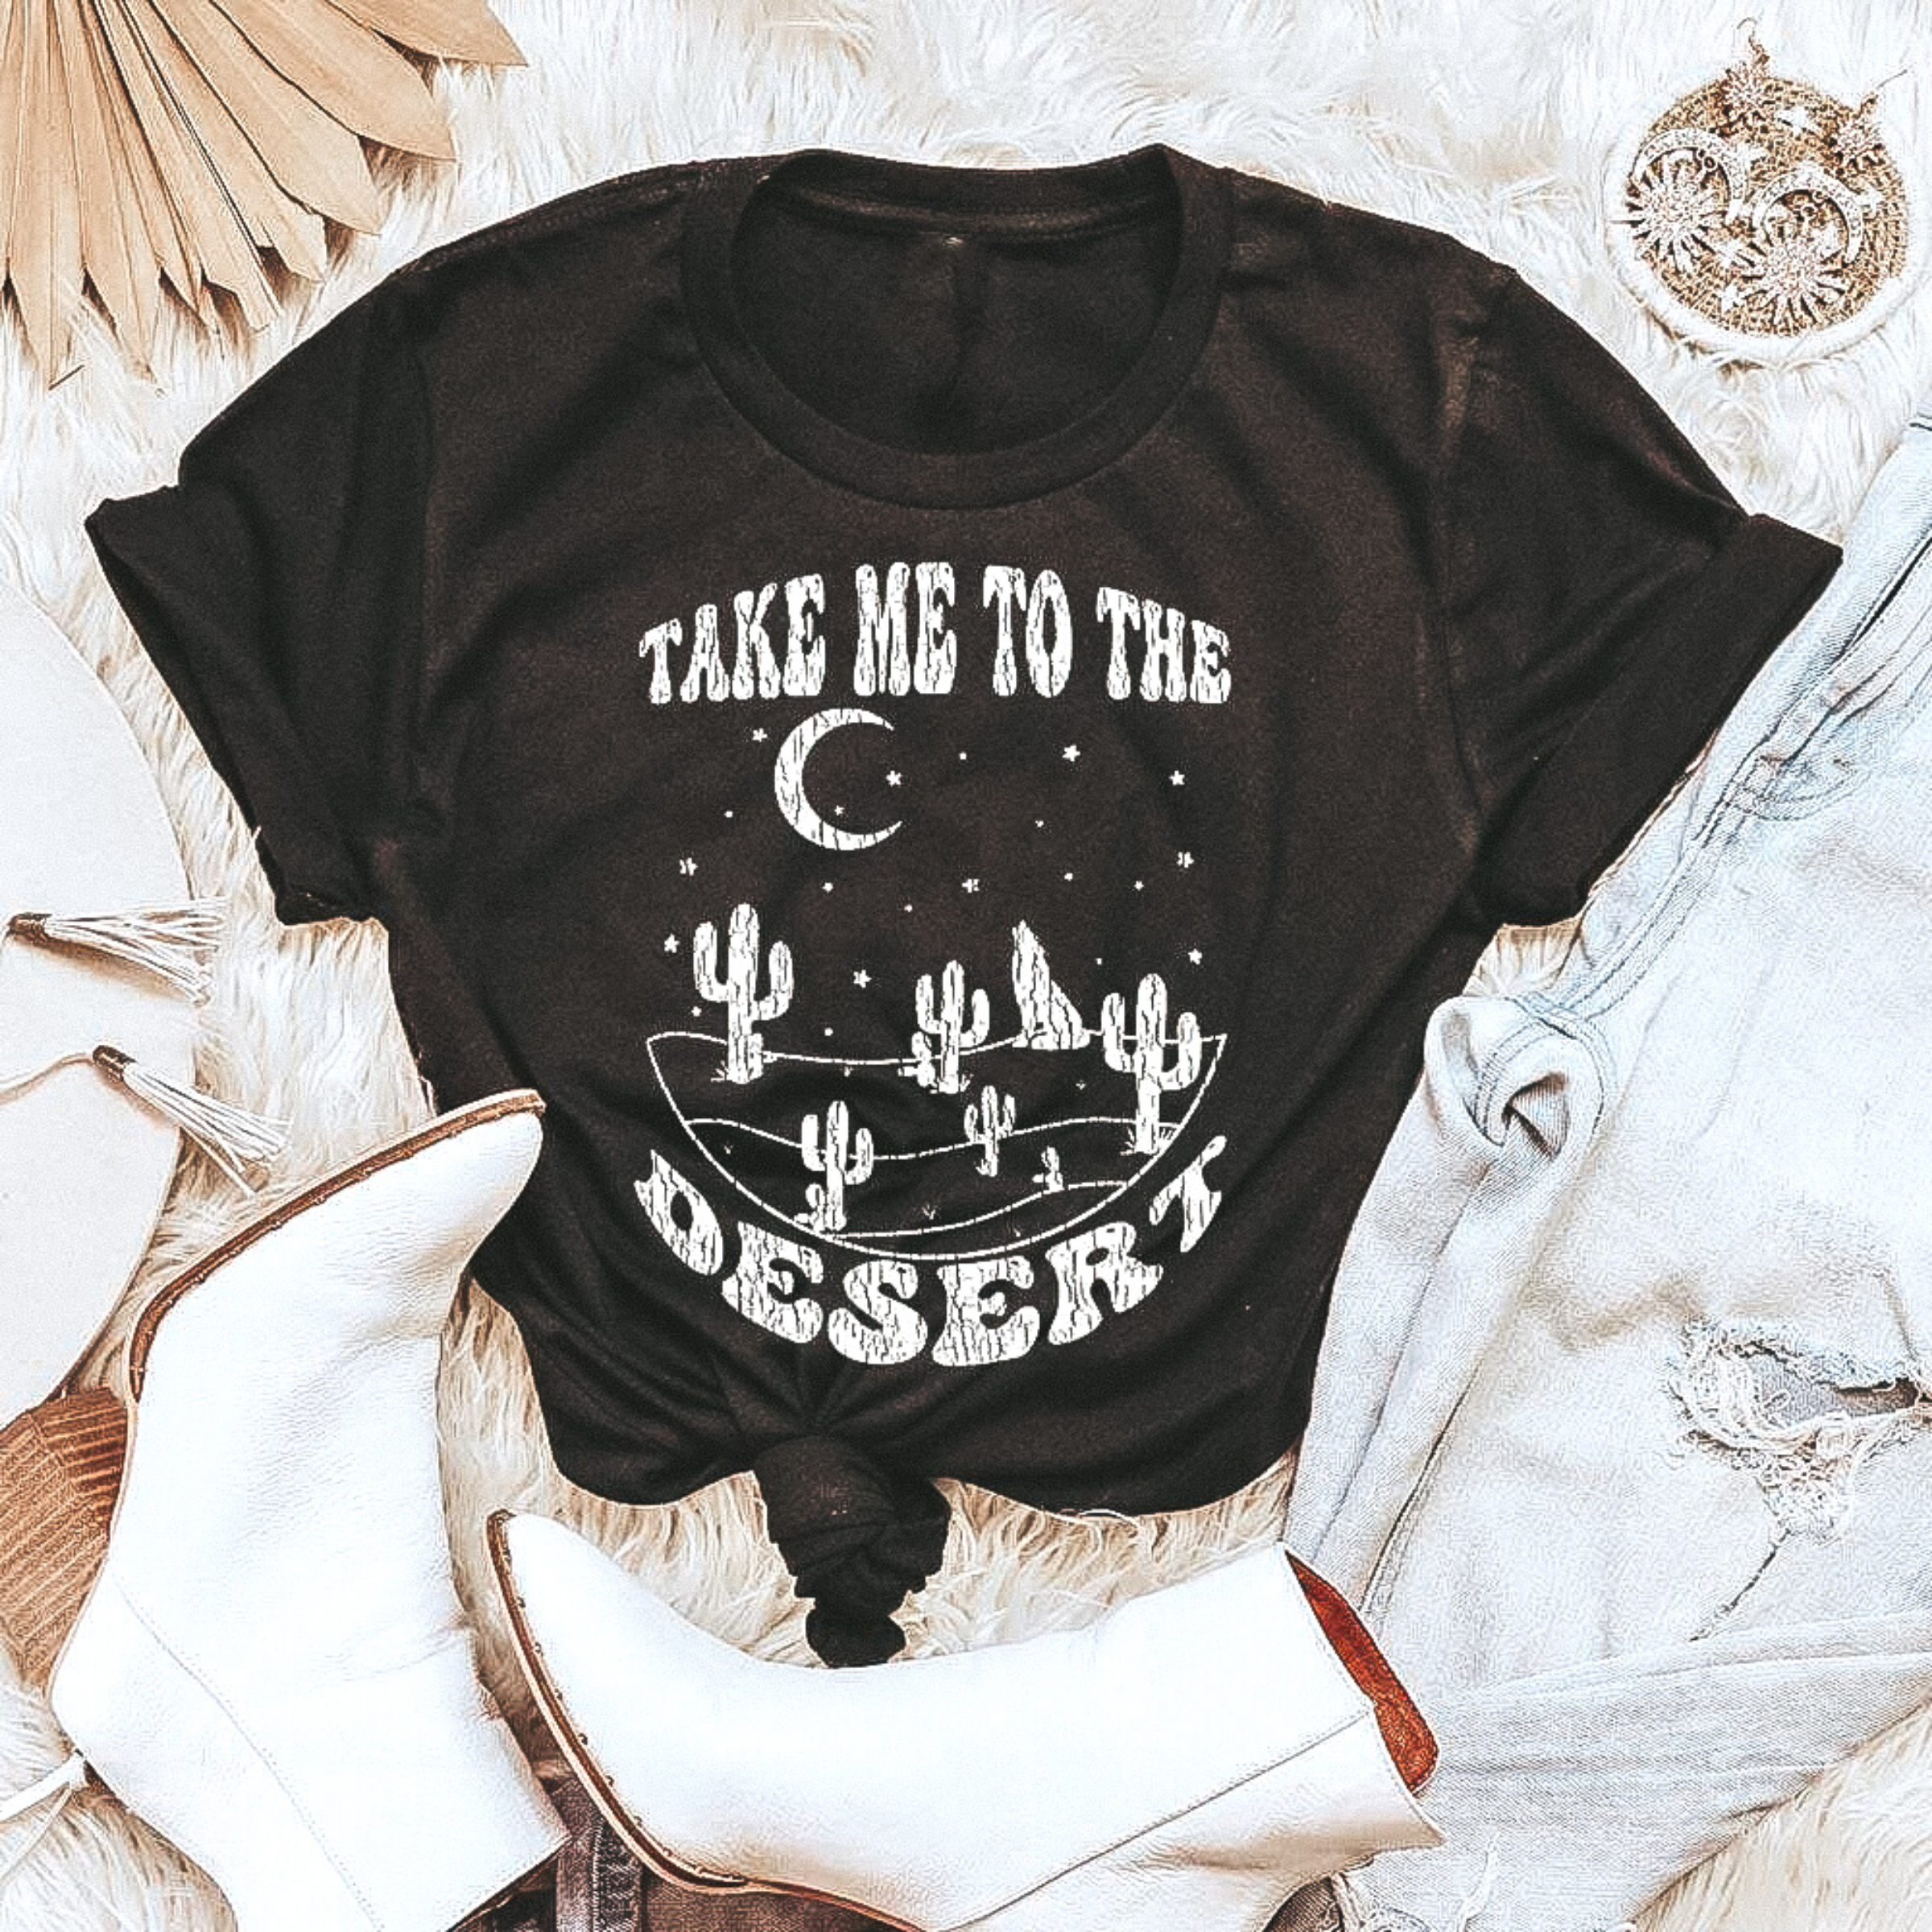 Black graphic tee with "Take me to the desert" in cute font. Surrounded by stars, cacti, moon and coyote You can see this tee paired with white booties and light wash jeans. Shirt is laid on top of a fuzzy rug with cute trinkets surrounding.